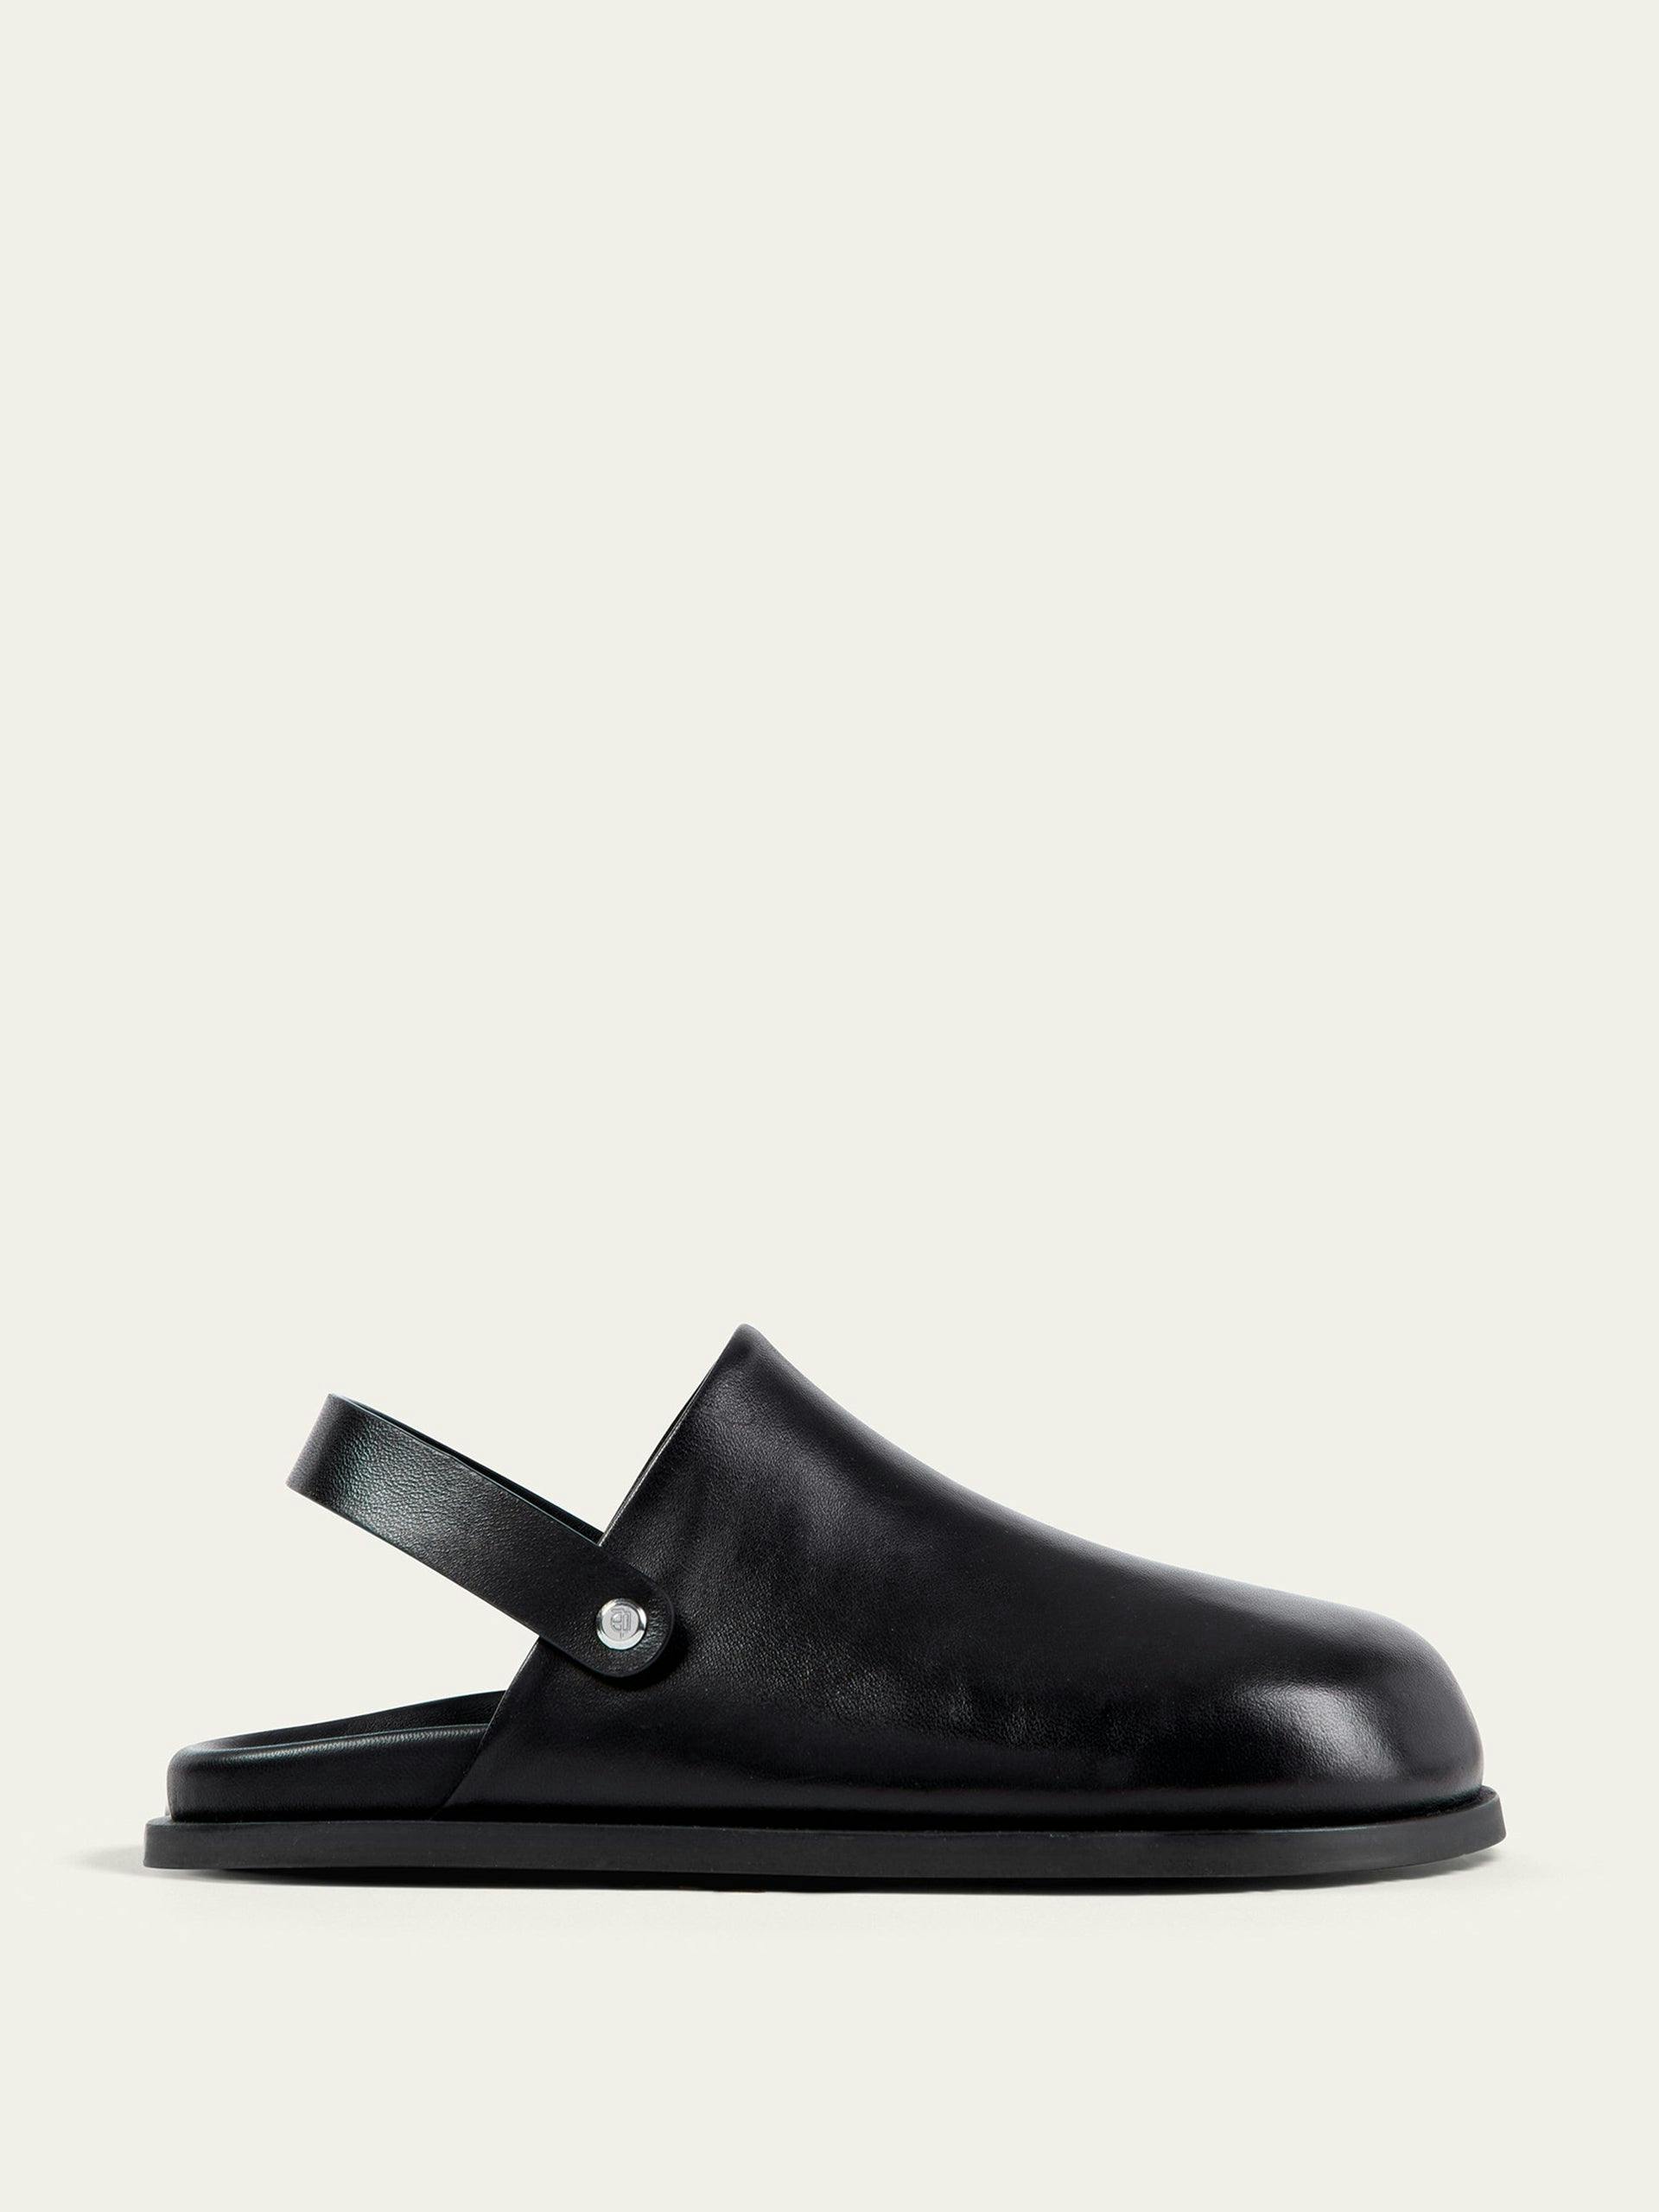 The Clog in black